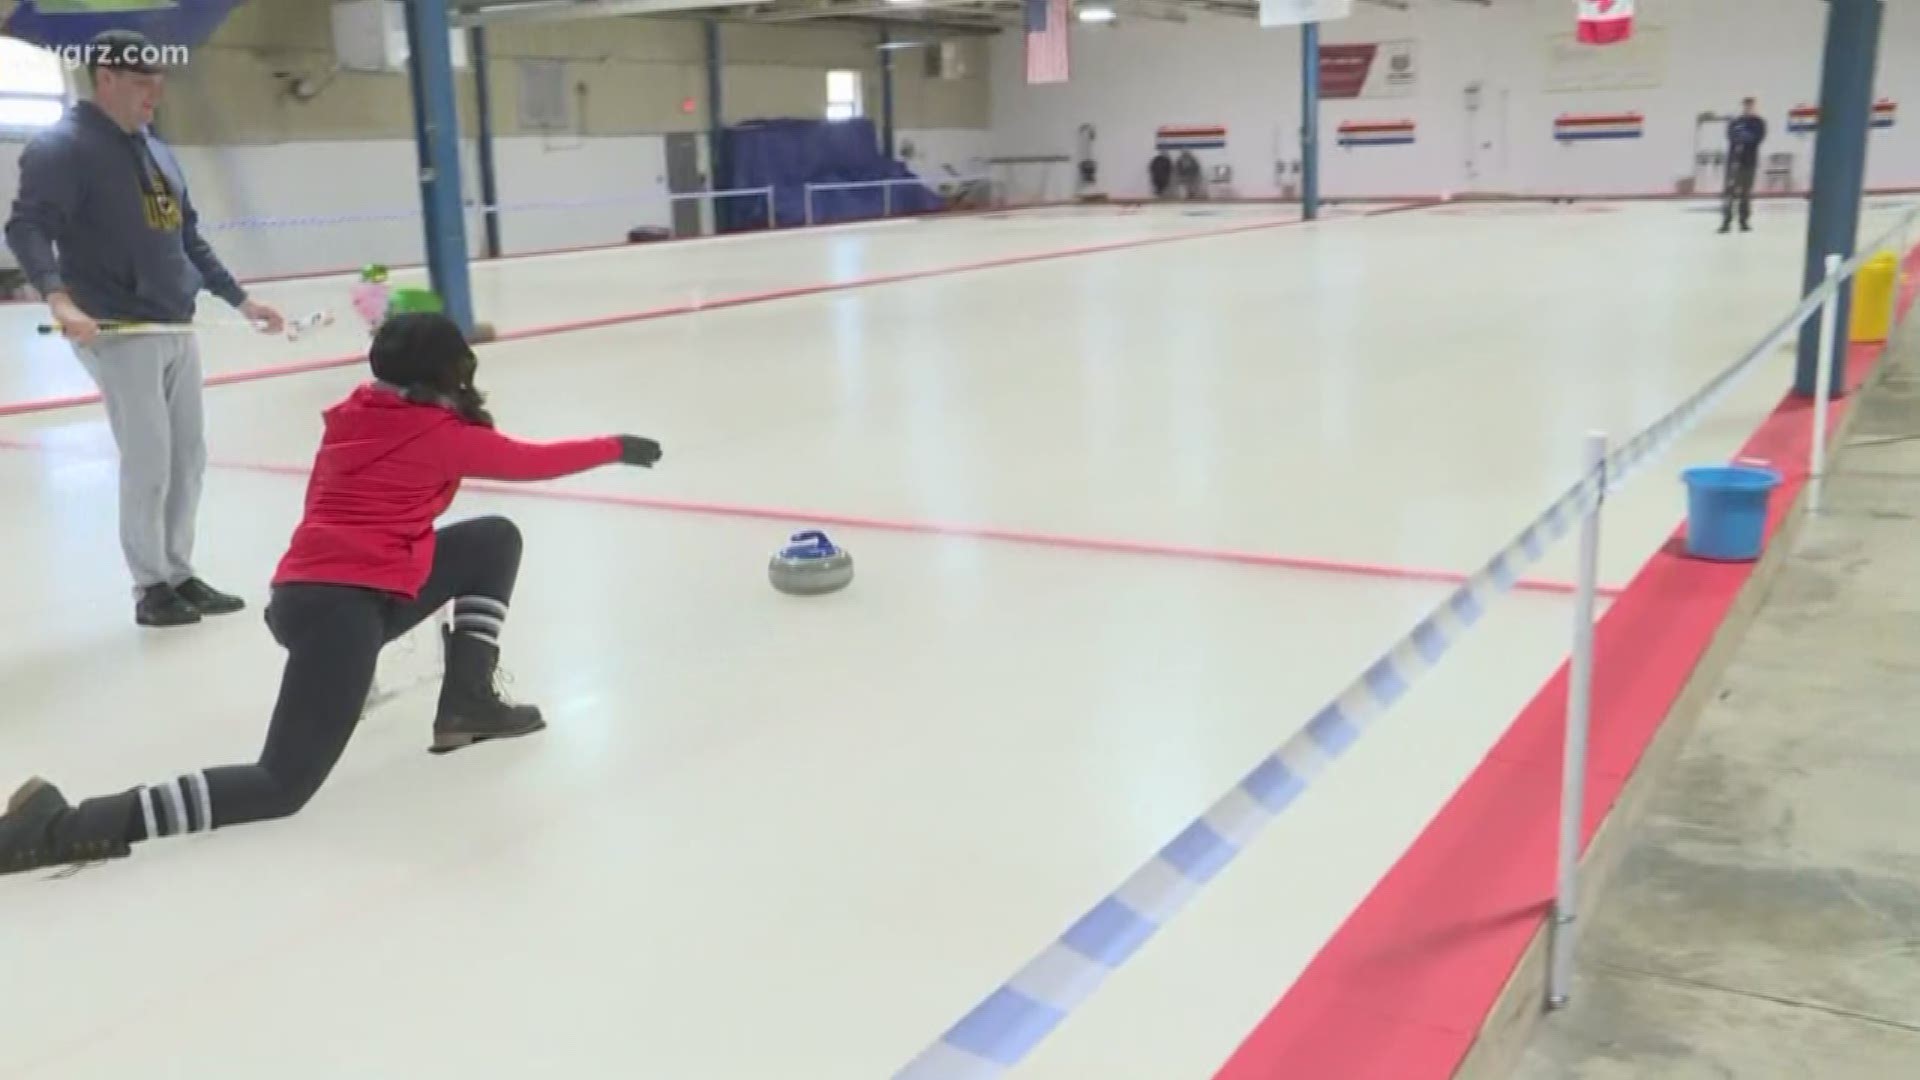 Daybreak's Karys Belger is at the Buffalo Curling Club for their Olympic Open House.